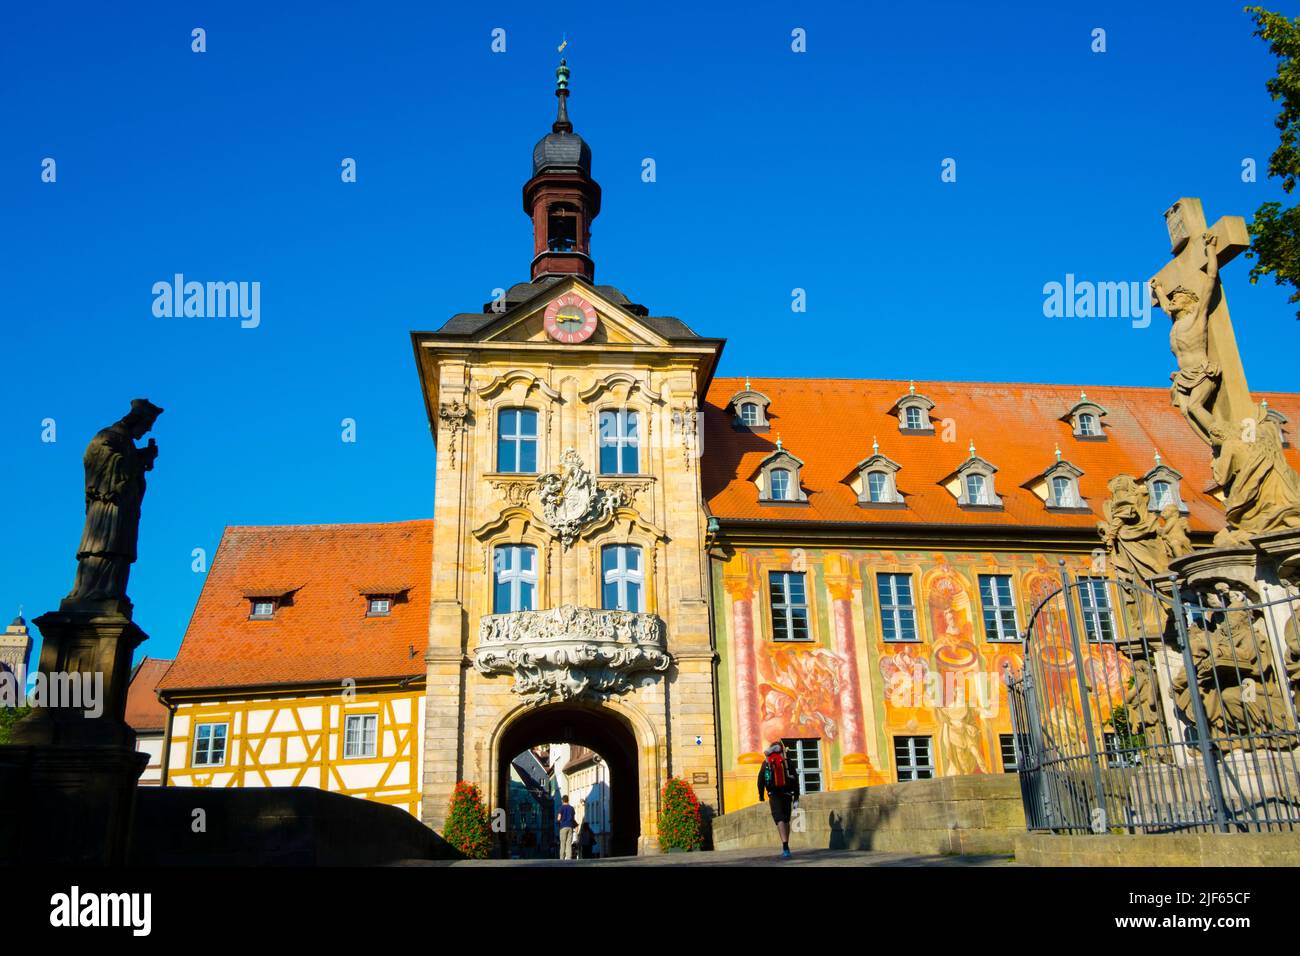 Old town hall or Altes Rathaus in Bamberg Bavaria Germany Stock Photo